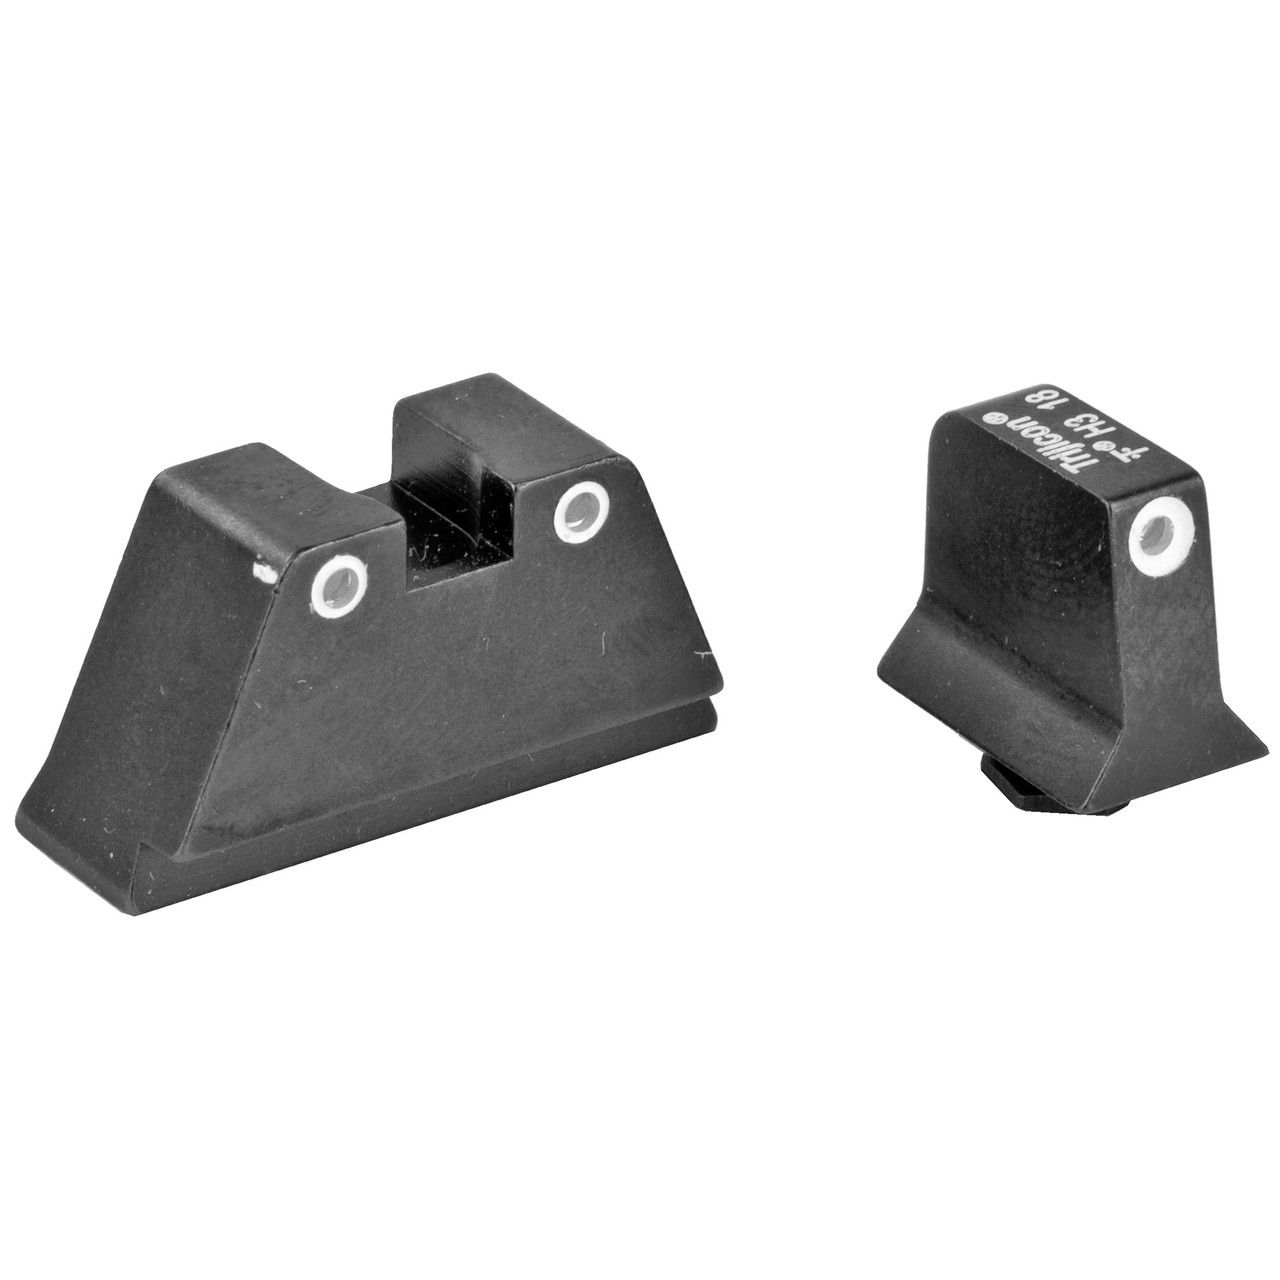 Trijicon Sup Ns Grn For Glk 9mm Yell